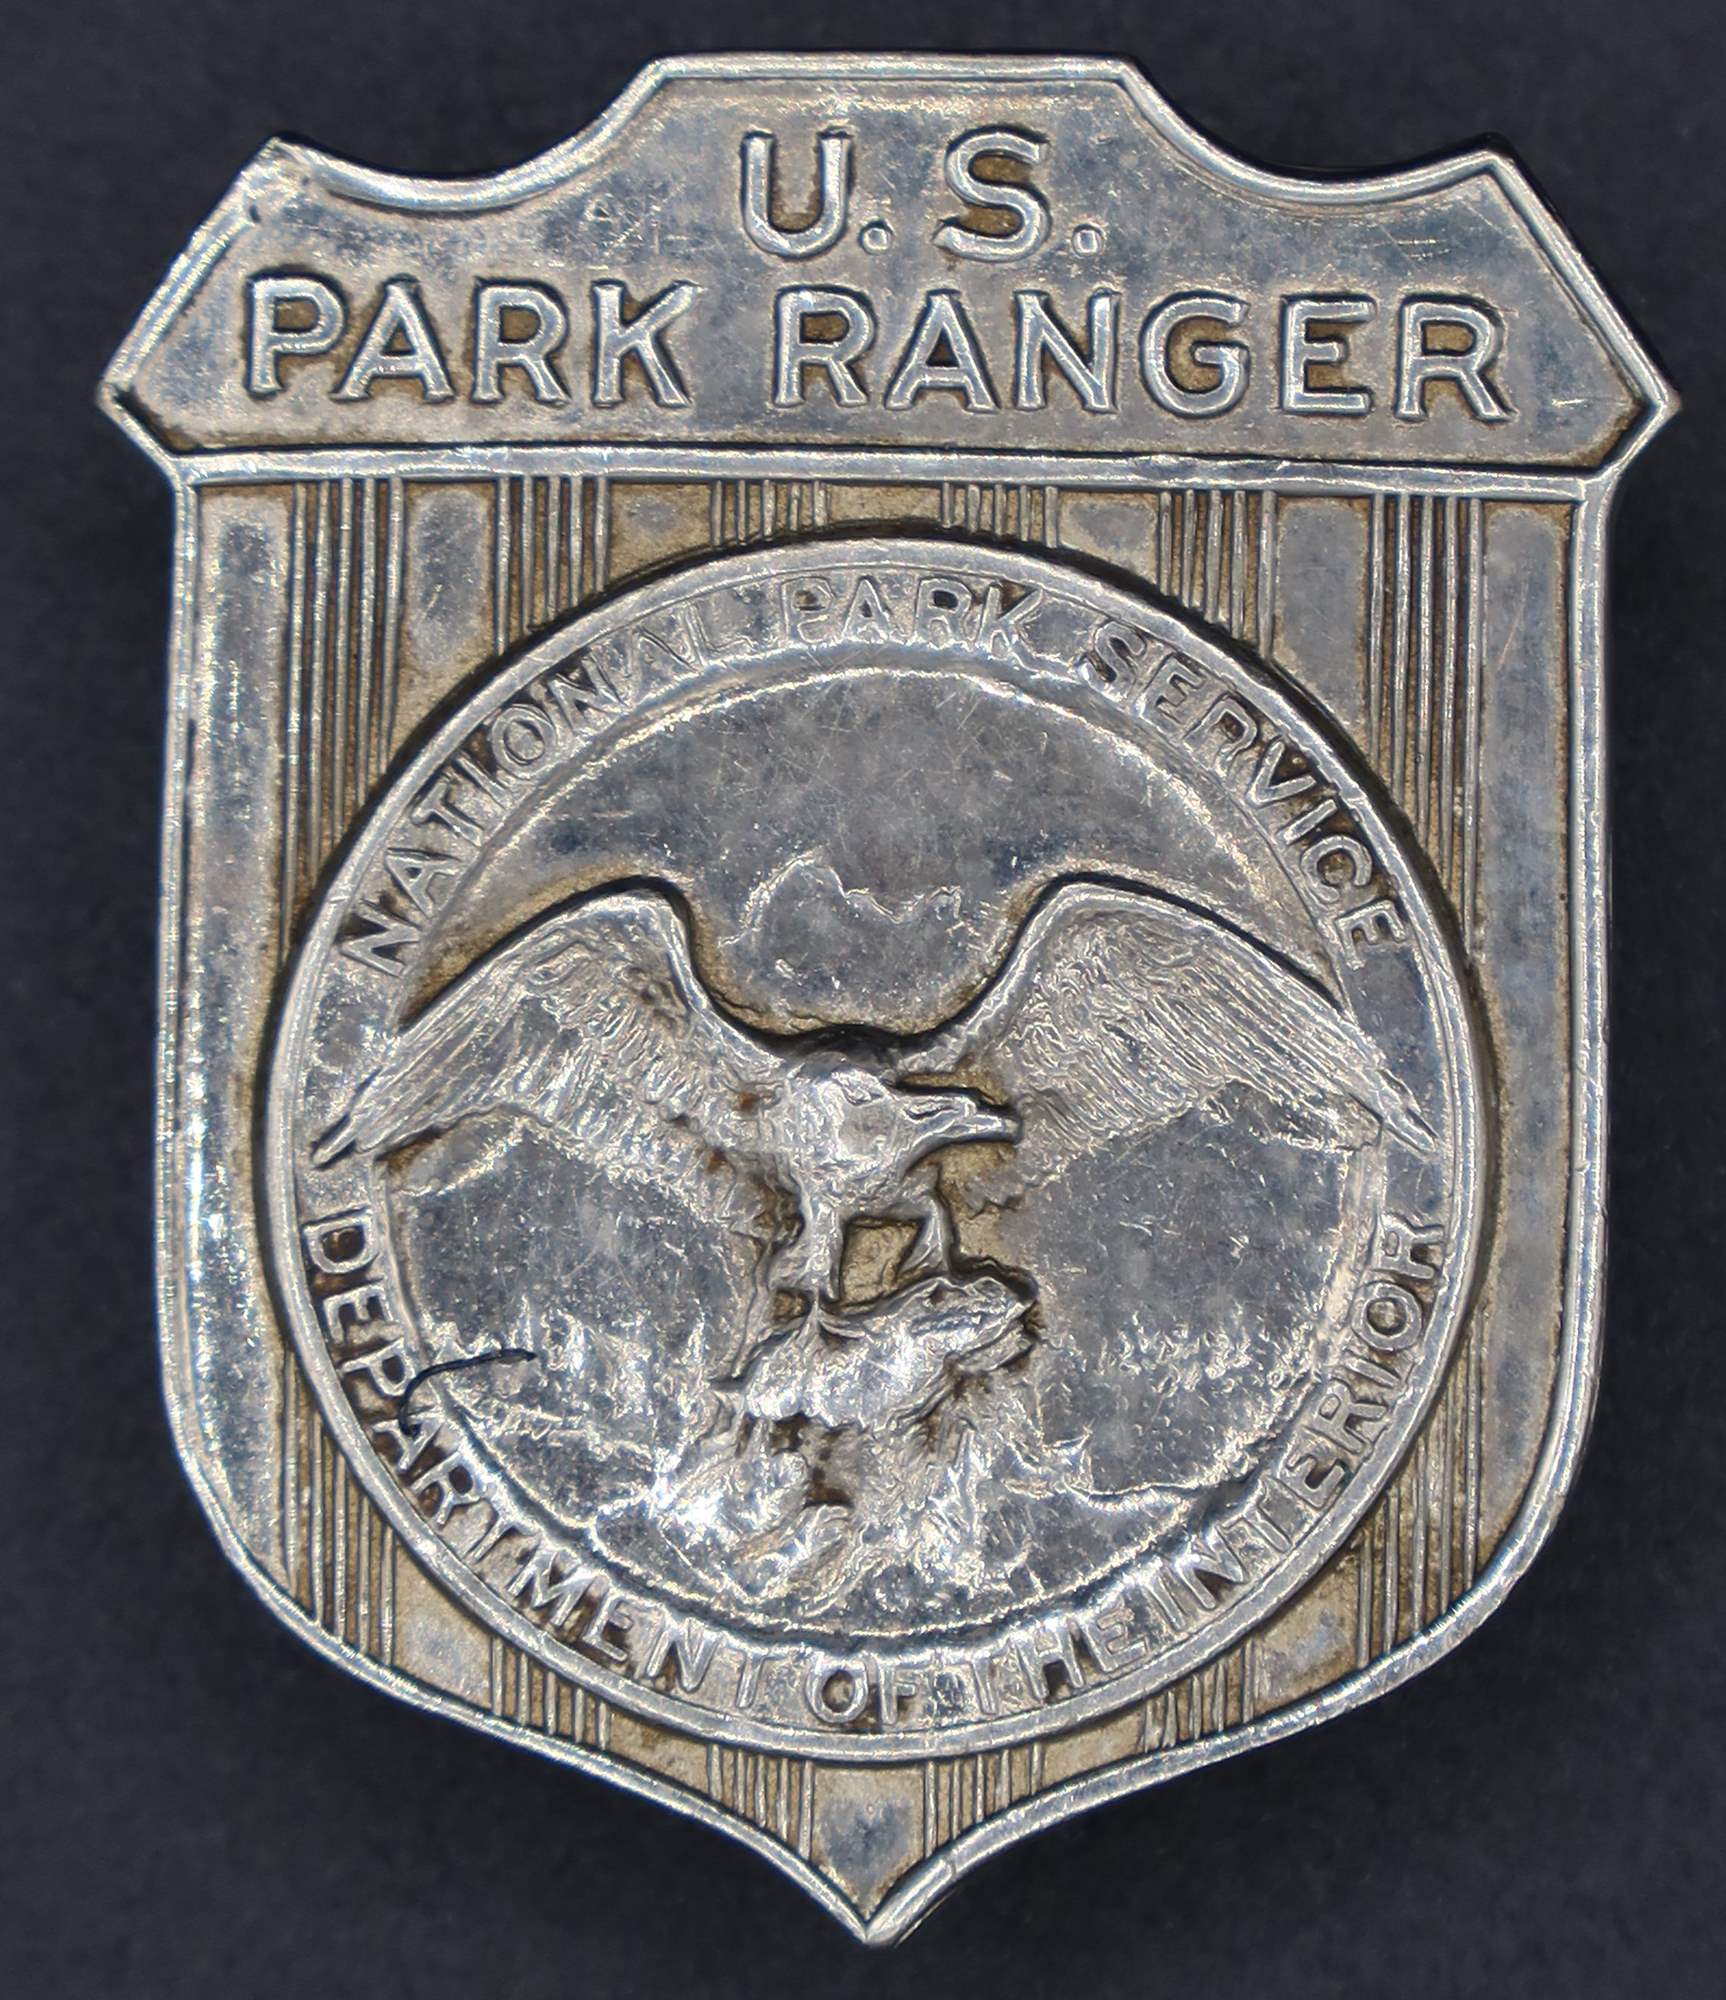 Silver shield-shaped badge marked U.S. Park Ranger. The raised round seal in the middle has an eagle looking to its left.